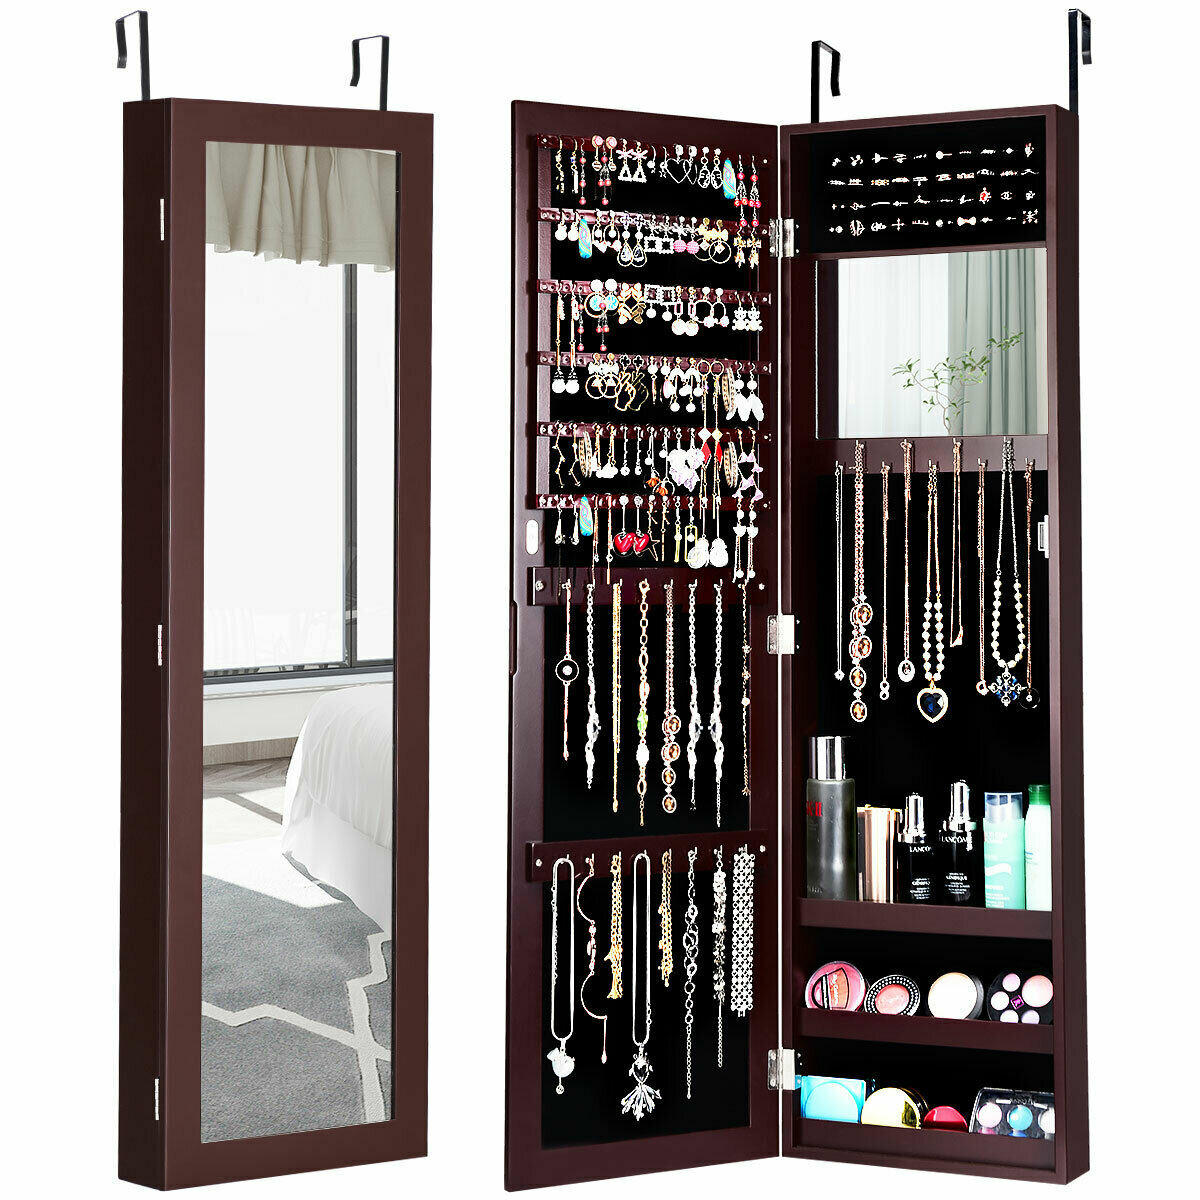 Ebern Designs Maura Storage Organizer Over The Door Wall Mounted Jewelry Armoire With Mirror Reviews Wayfair